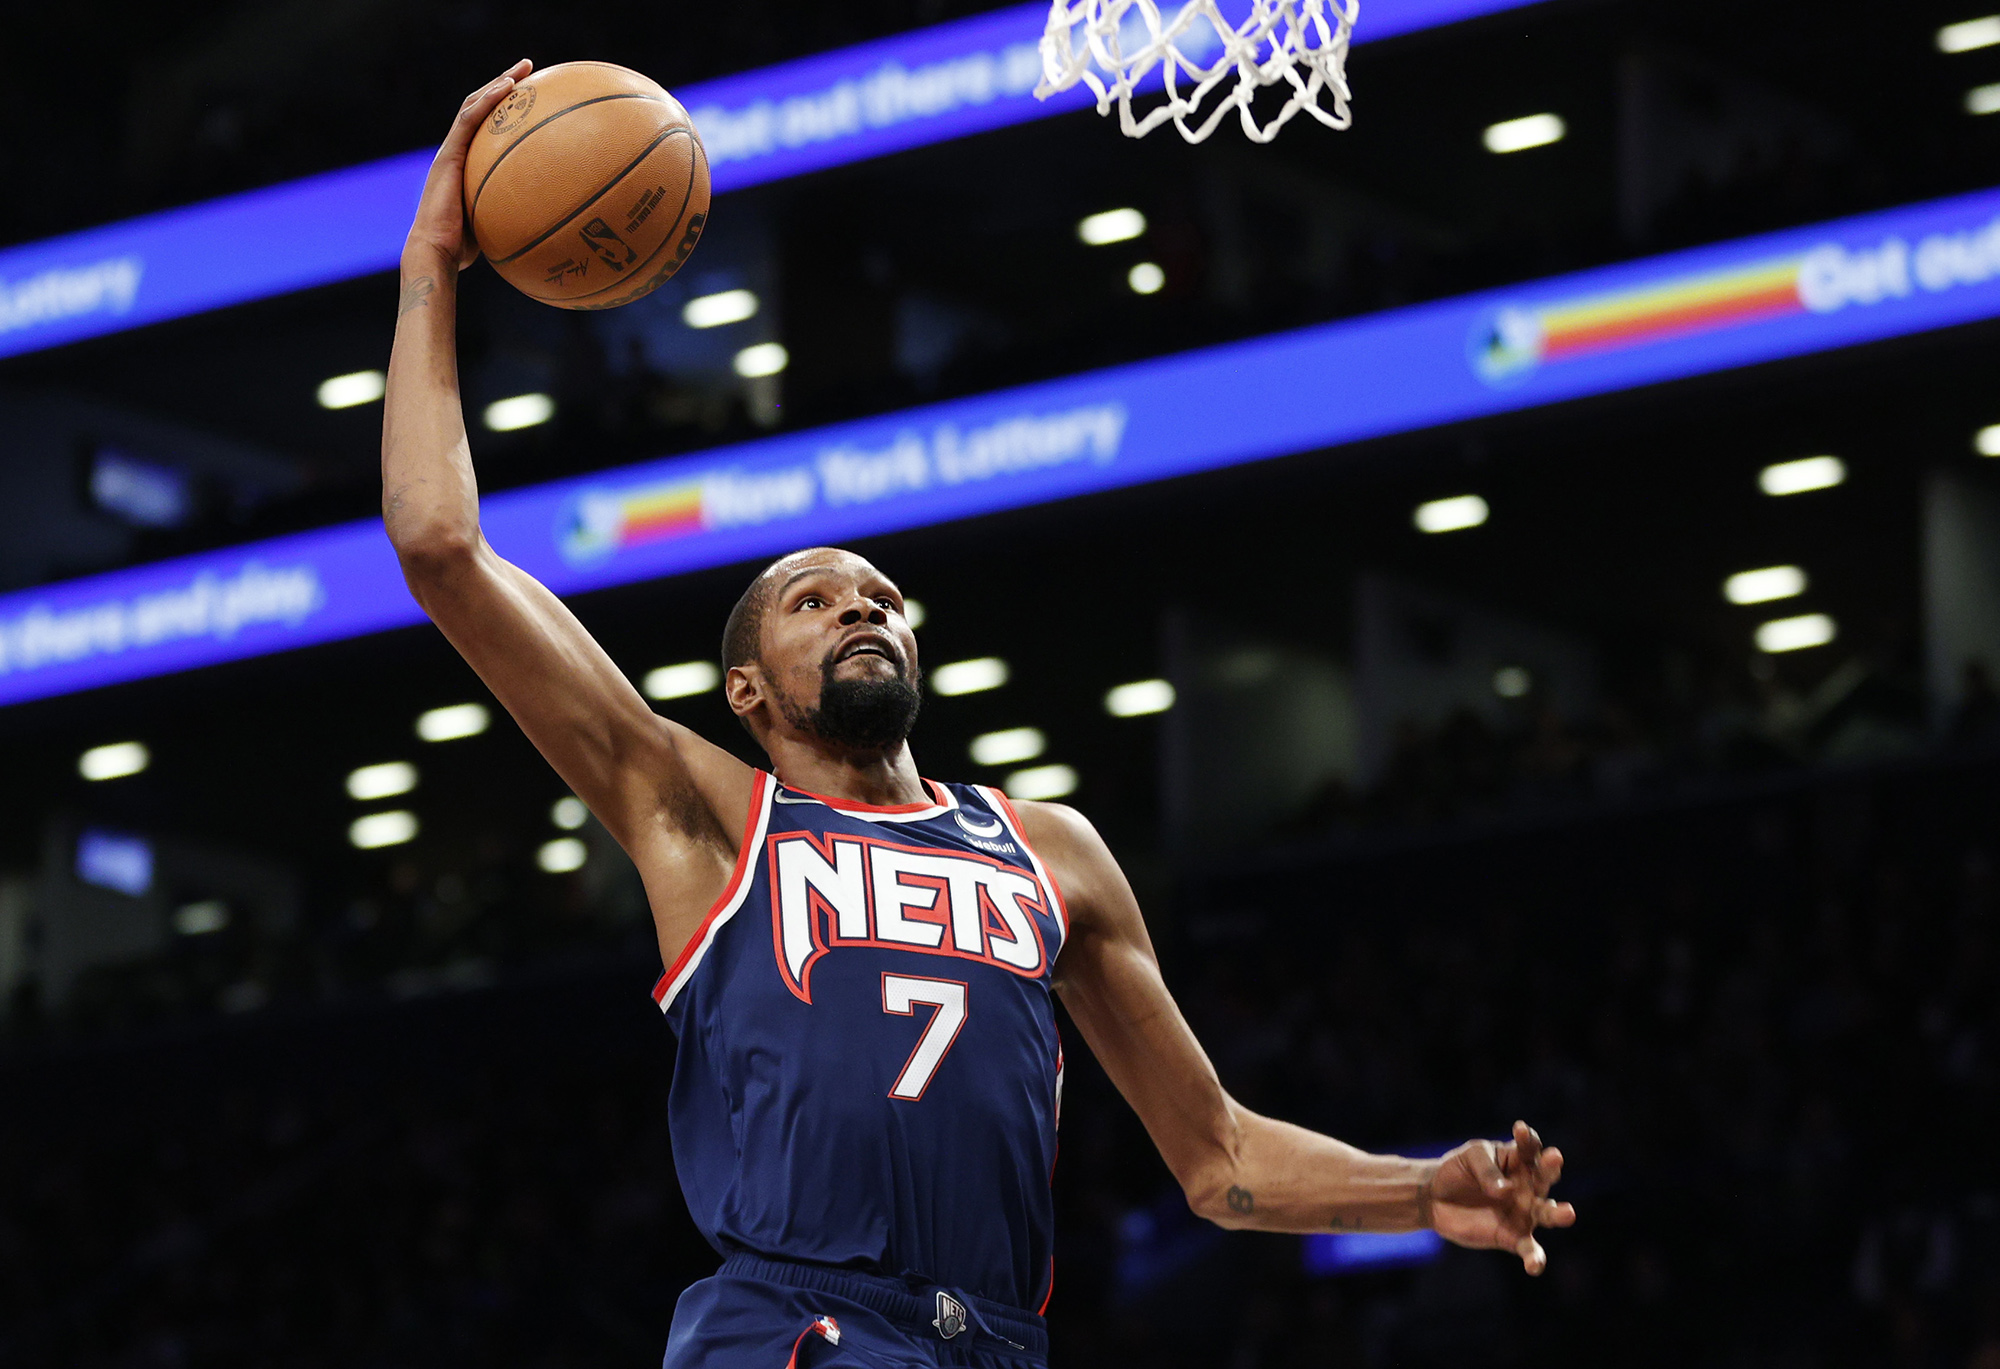 A History of NBA's Nets, From Secaucus Seven to Durant - Bloomberg